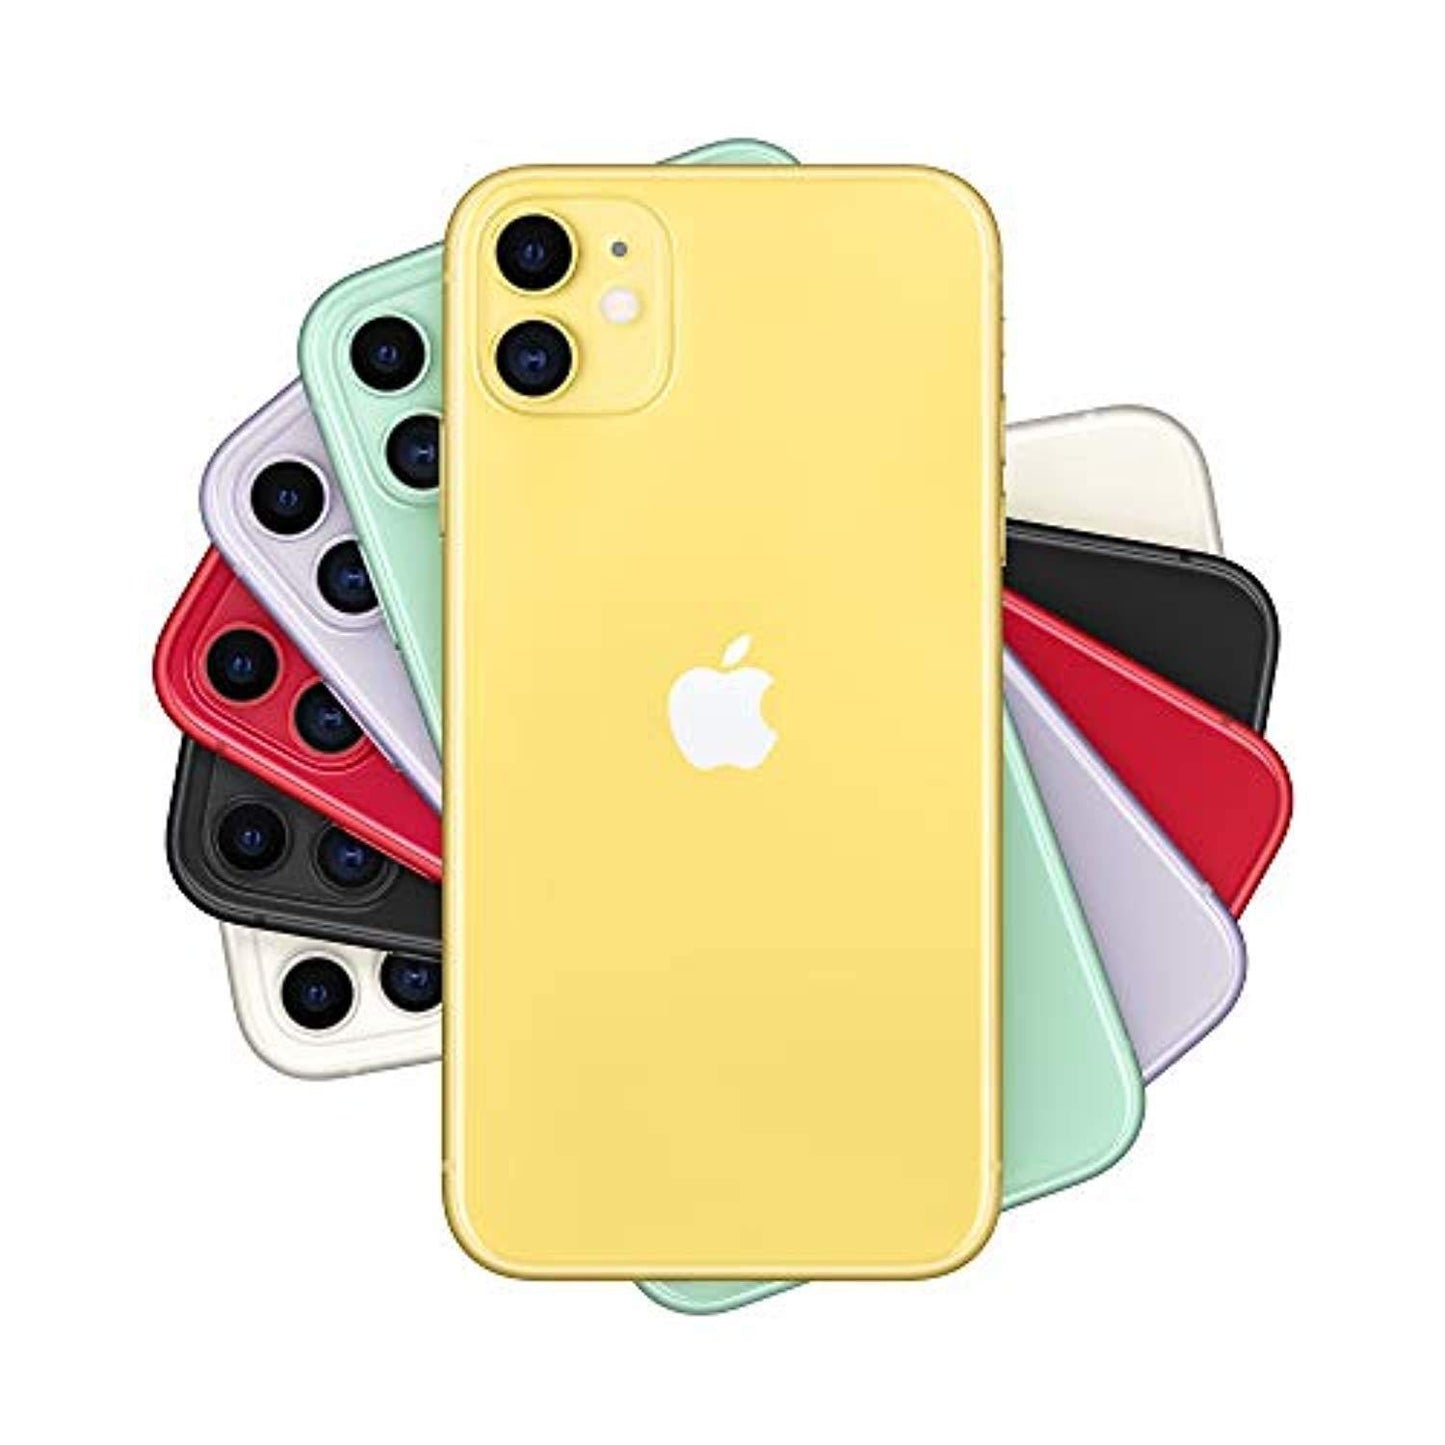 Apple iPhone 11 - Offer Games